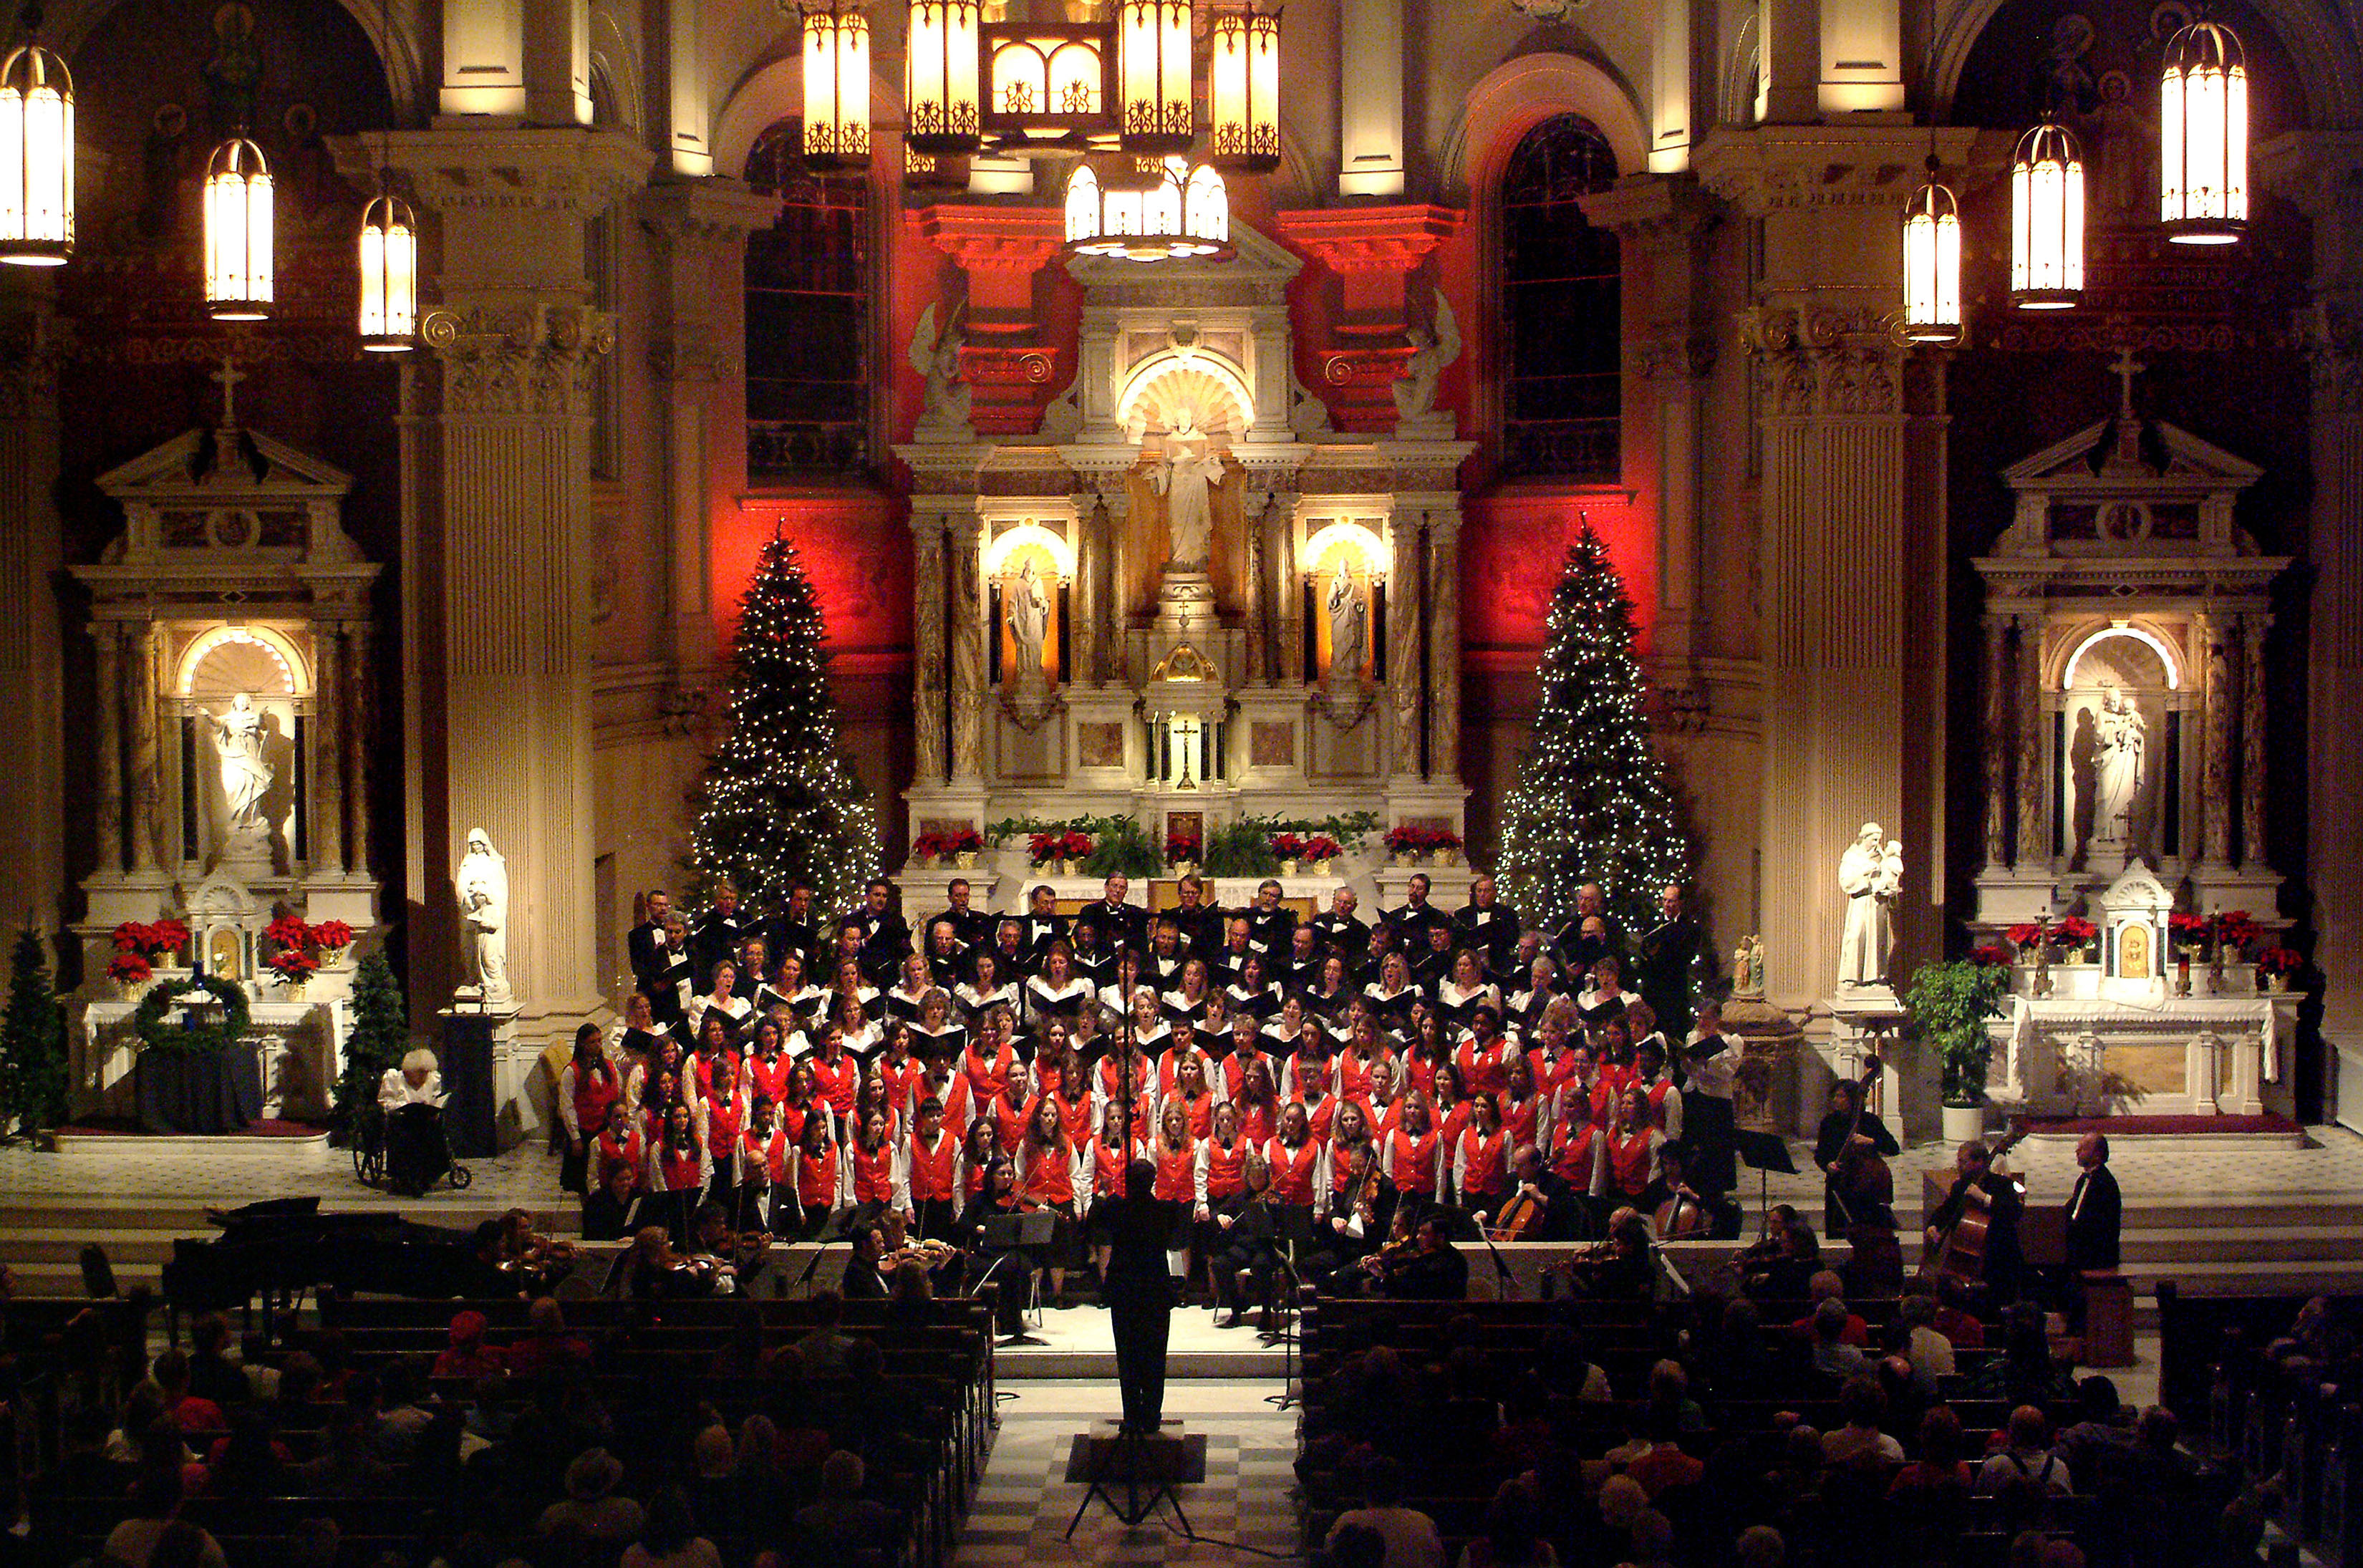 Summit Choral Society’s “Christmas Candlelight Concerts” The 